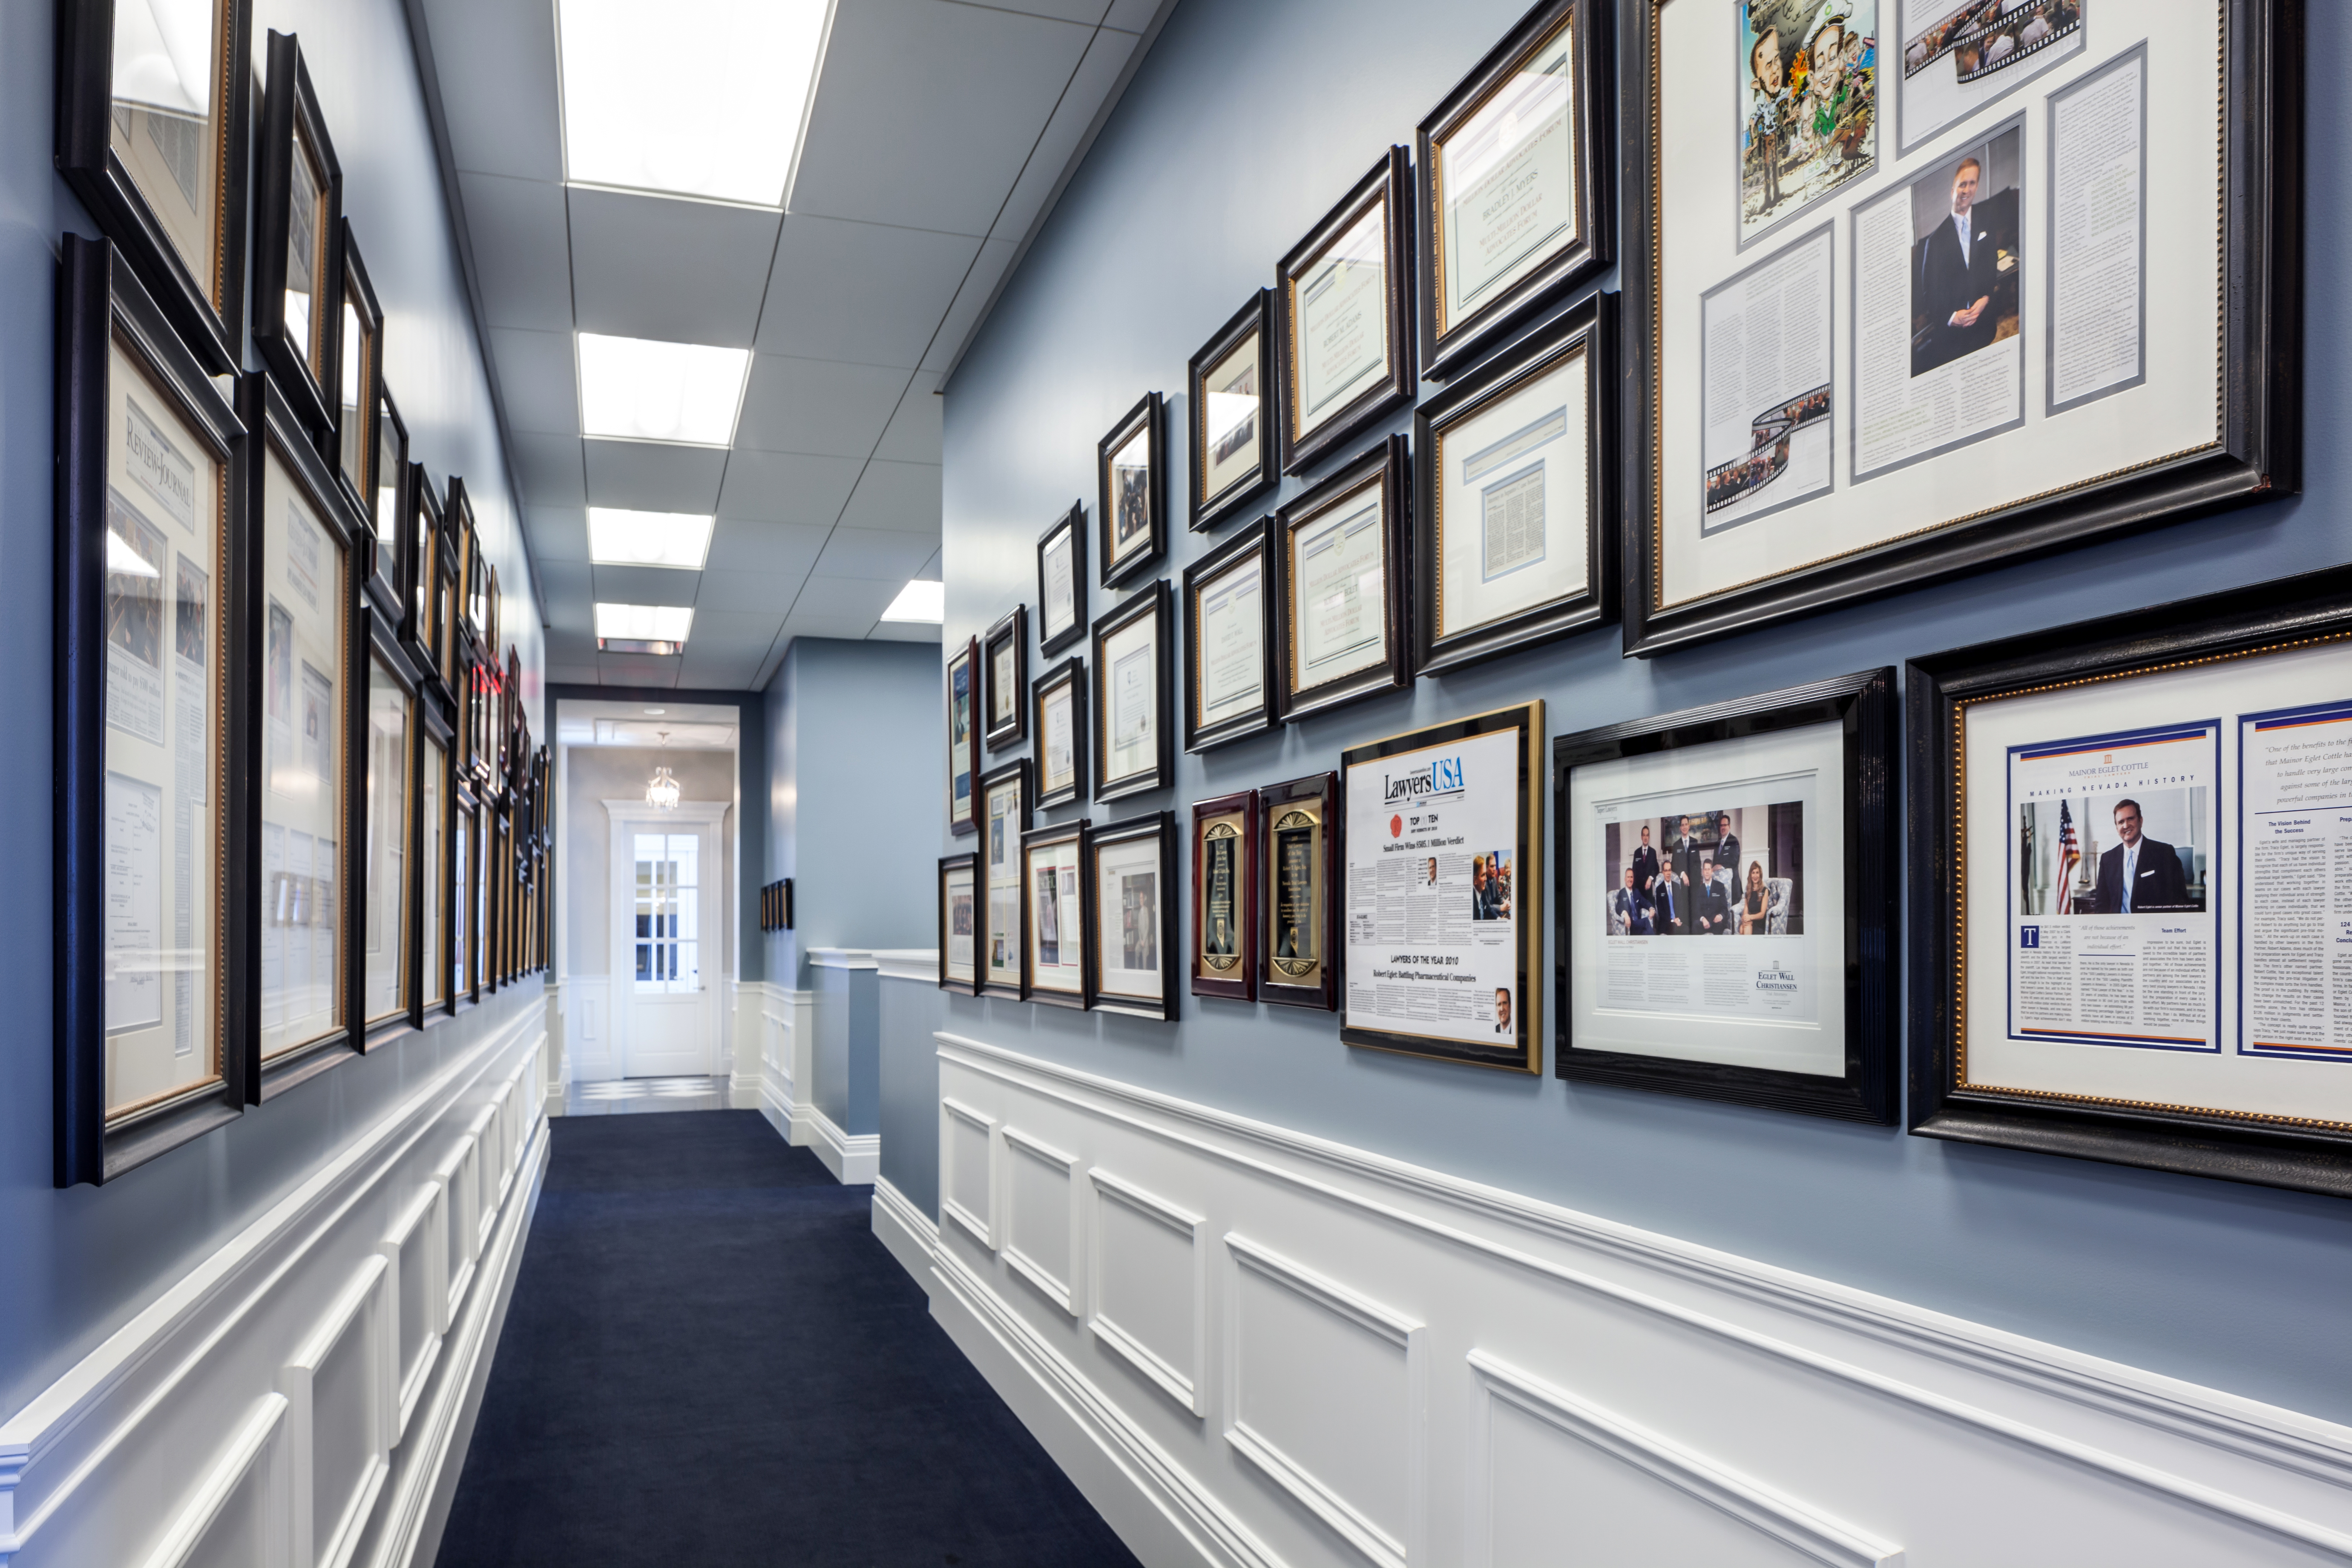 Eglet Prince office hallway with awards displayed